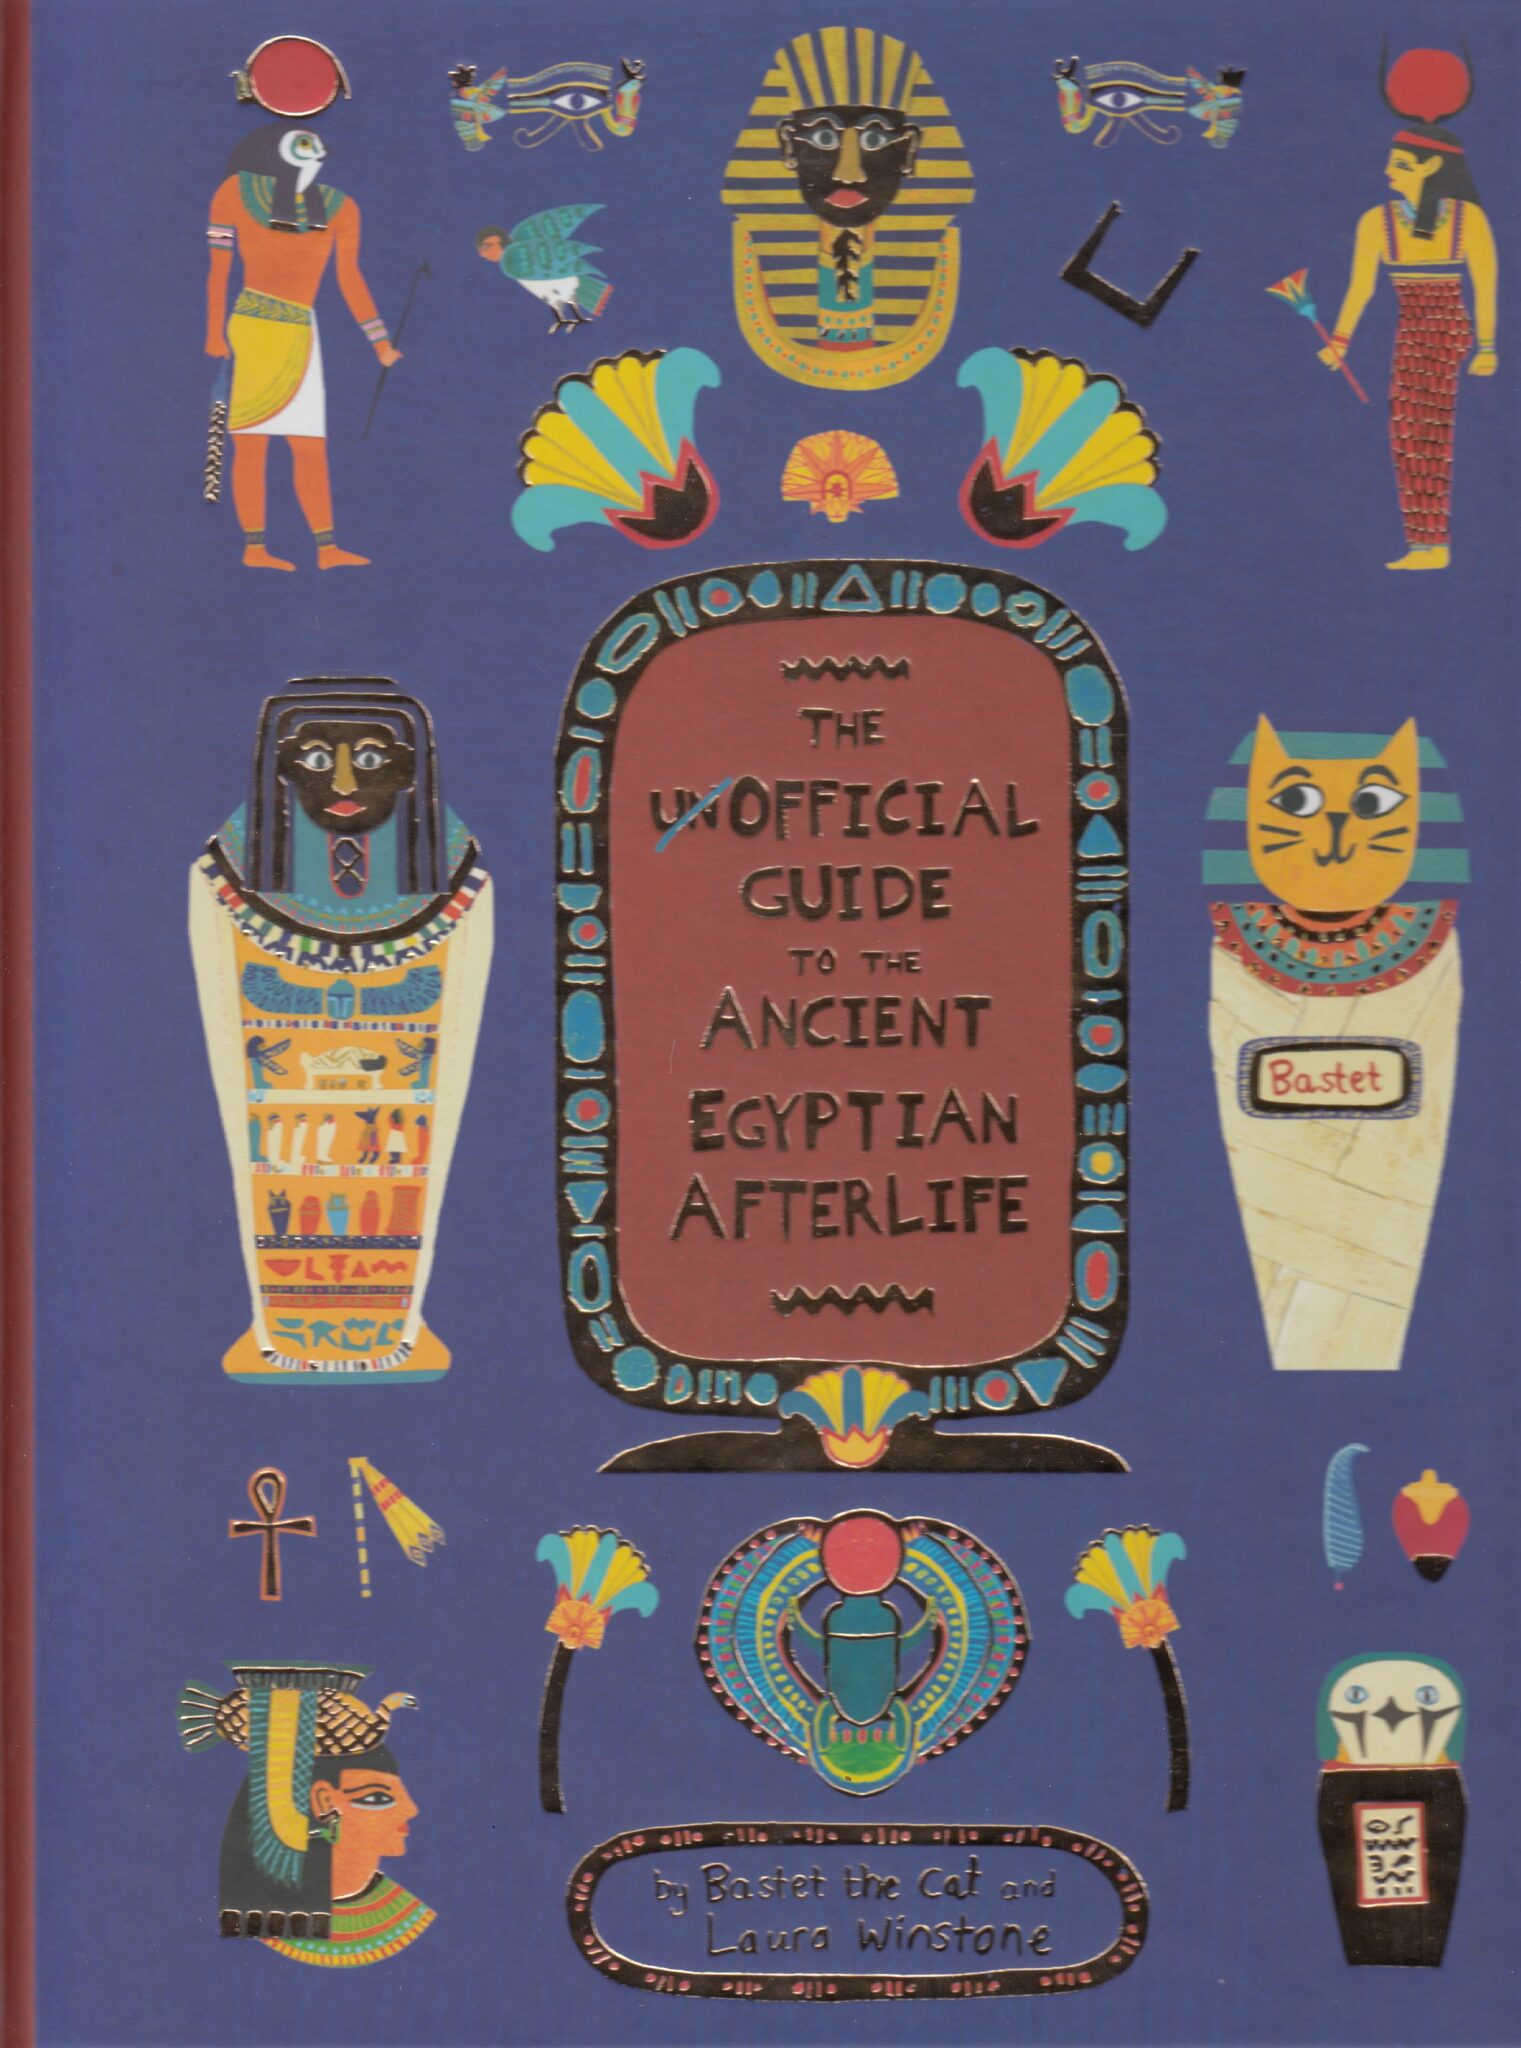 The Unofficial Guide to the Ancient Egyptian Afterlifeimage